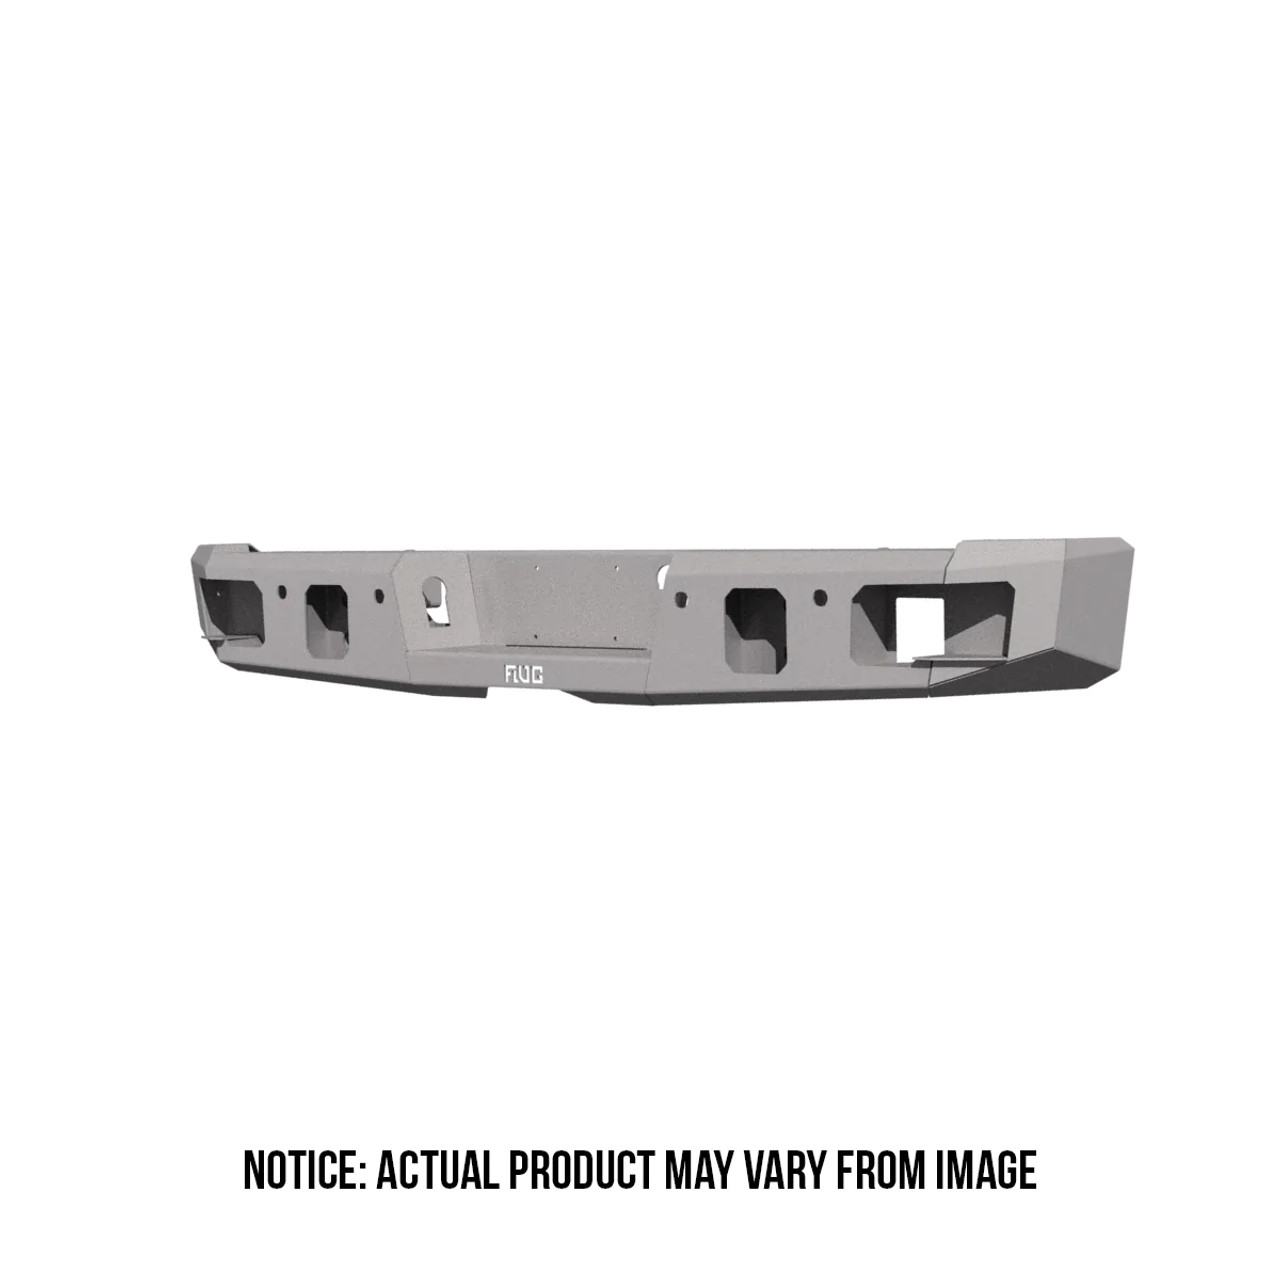 Flog WD Series REAR BUMPER - Chevy 2500-3500 - Other View